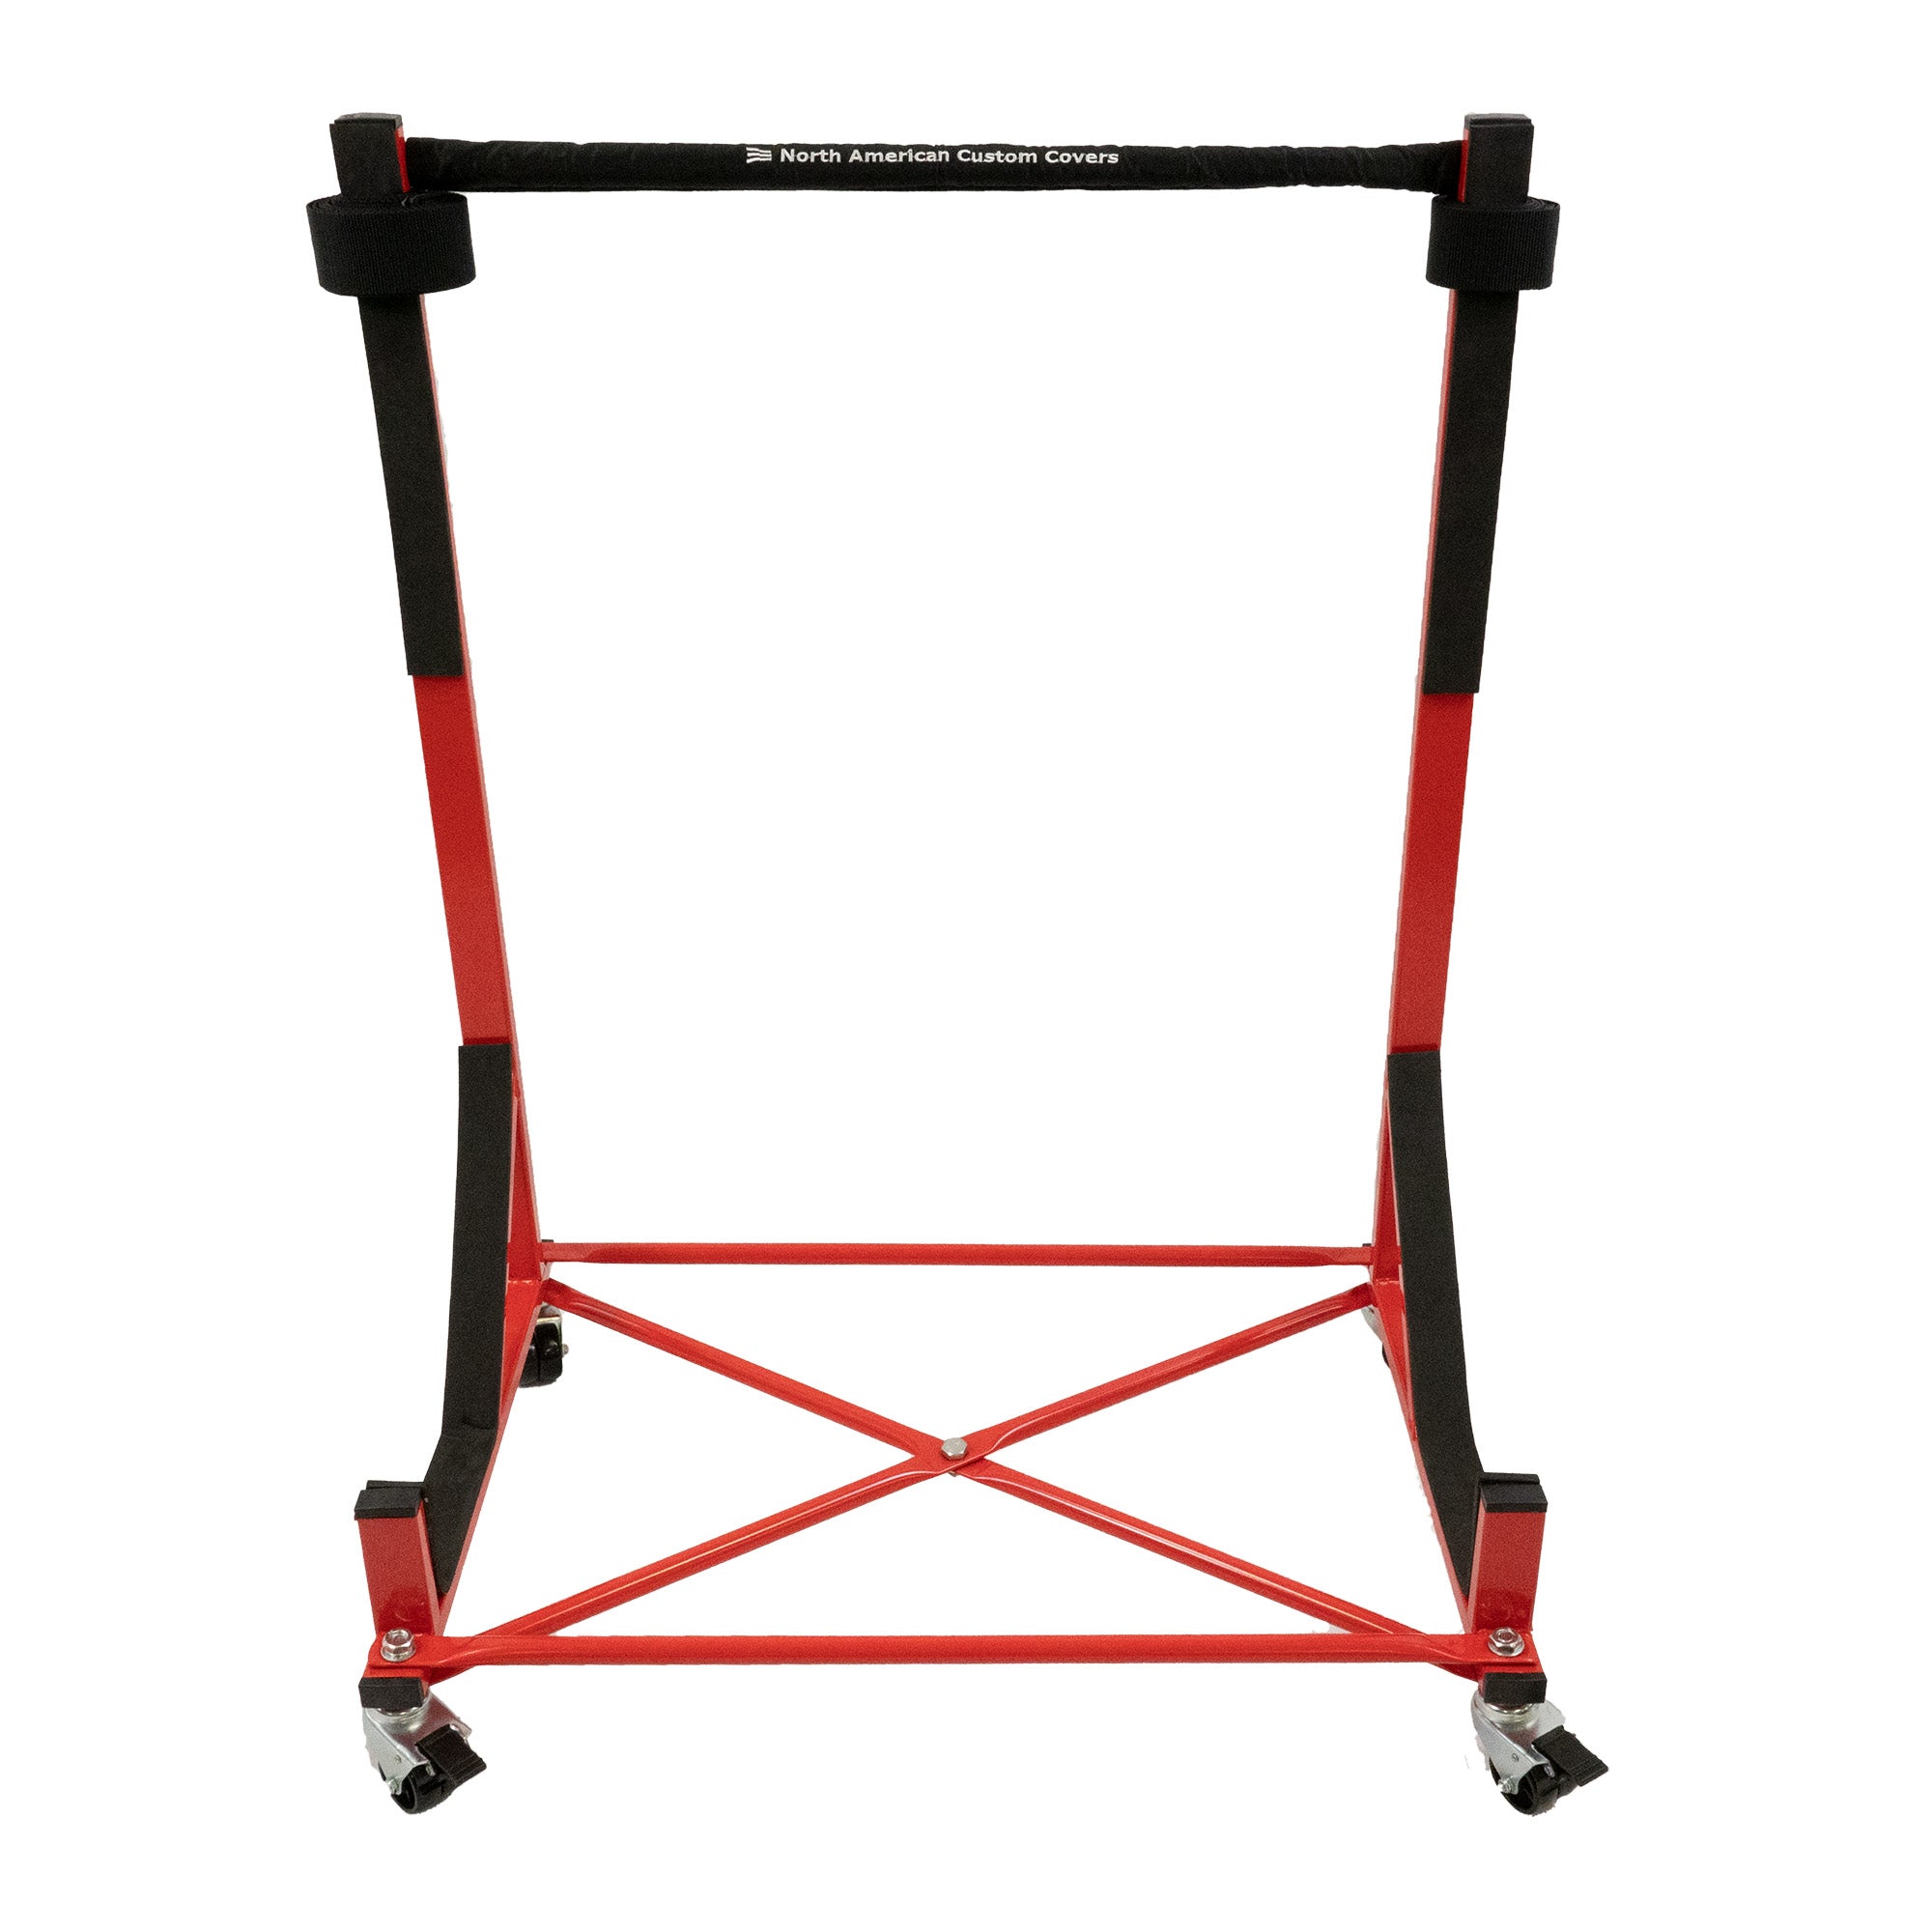 Jaguar Heavy-duty Hardtop Stand Trolley Cart Rack (Red) with Securing Harness and Hard Top Dust Cover (050R)